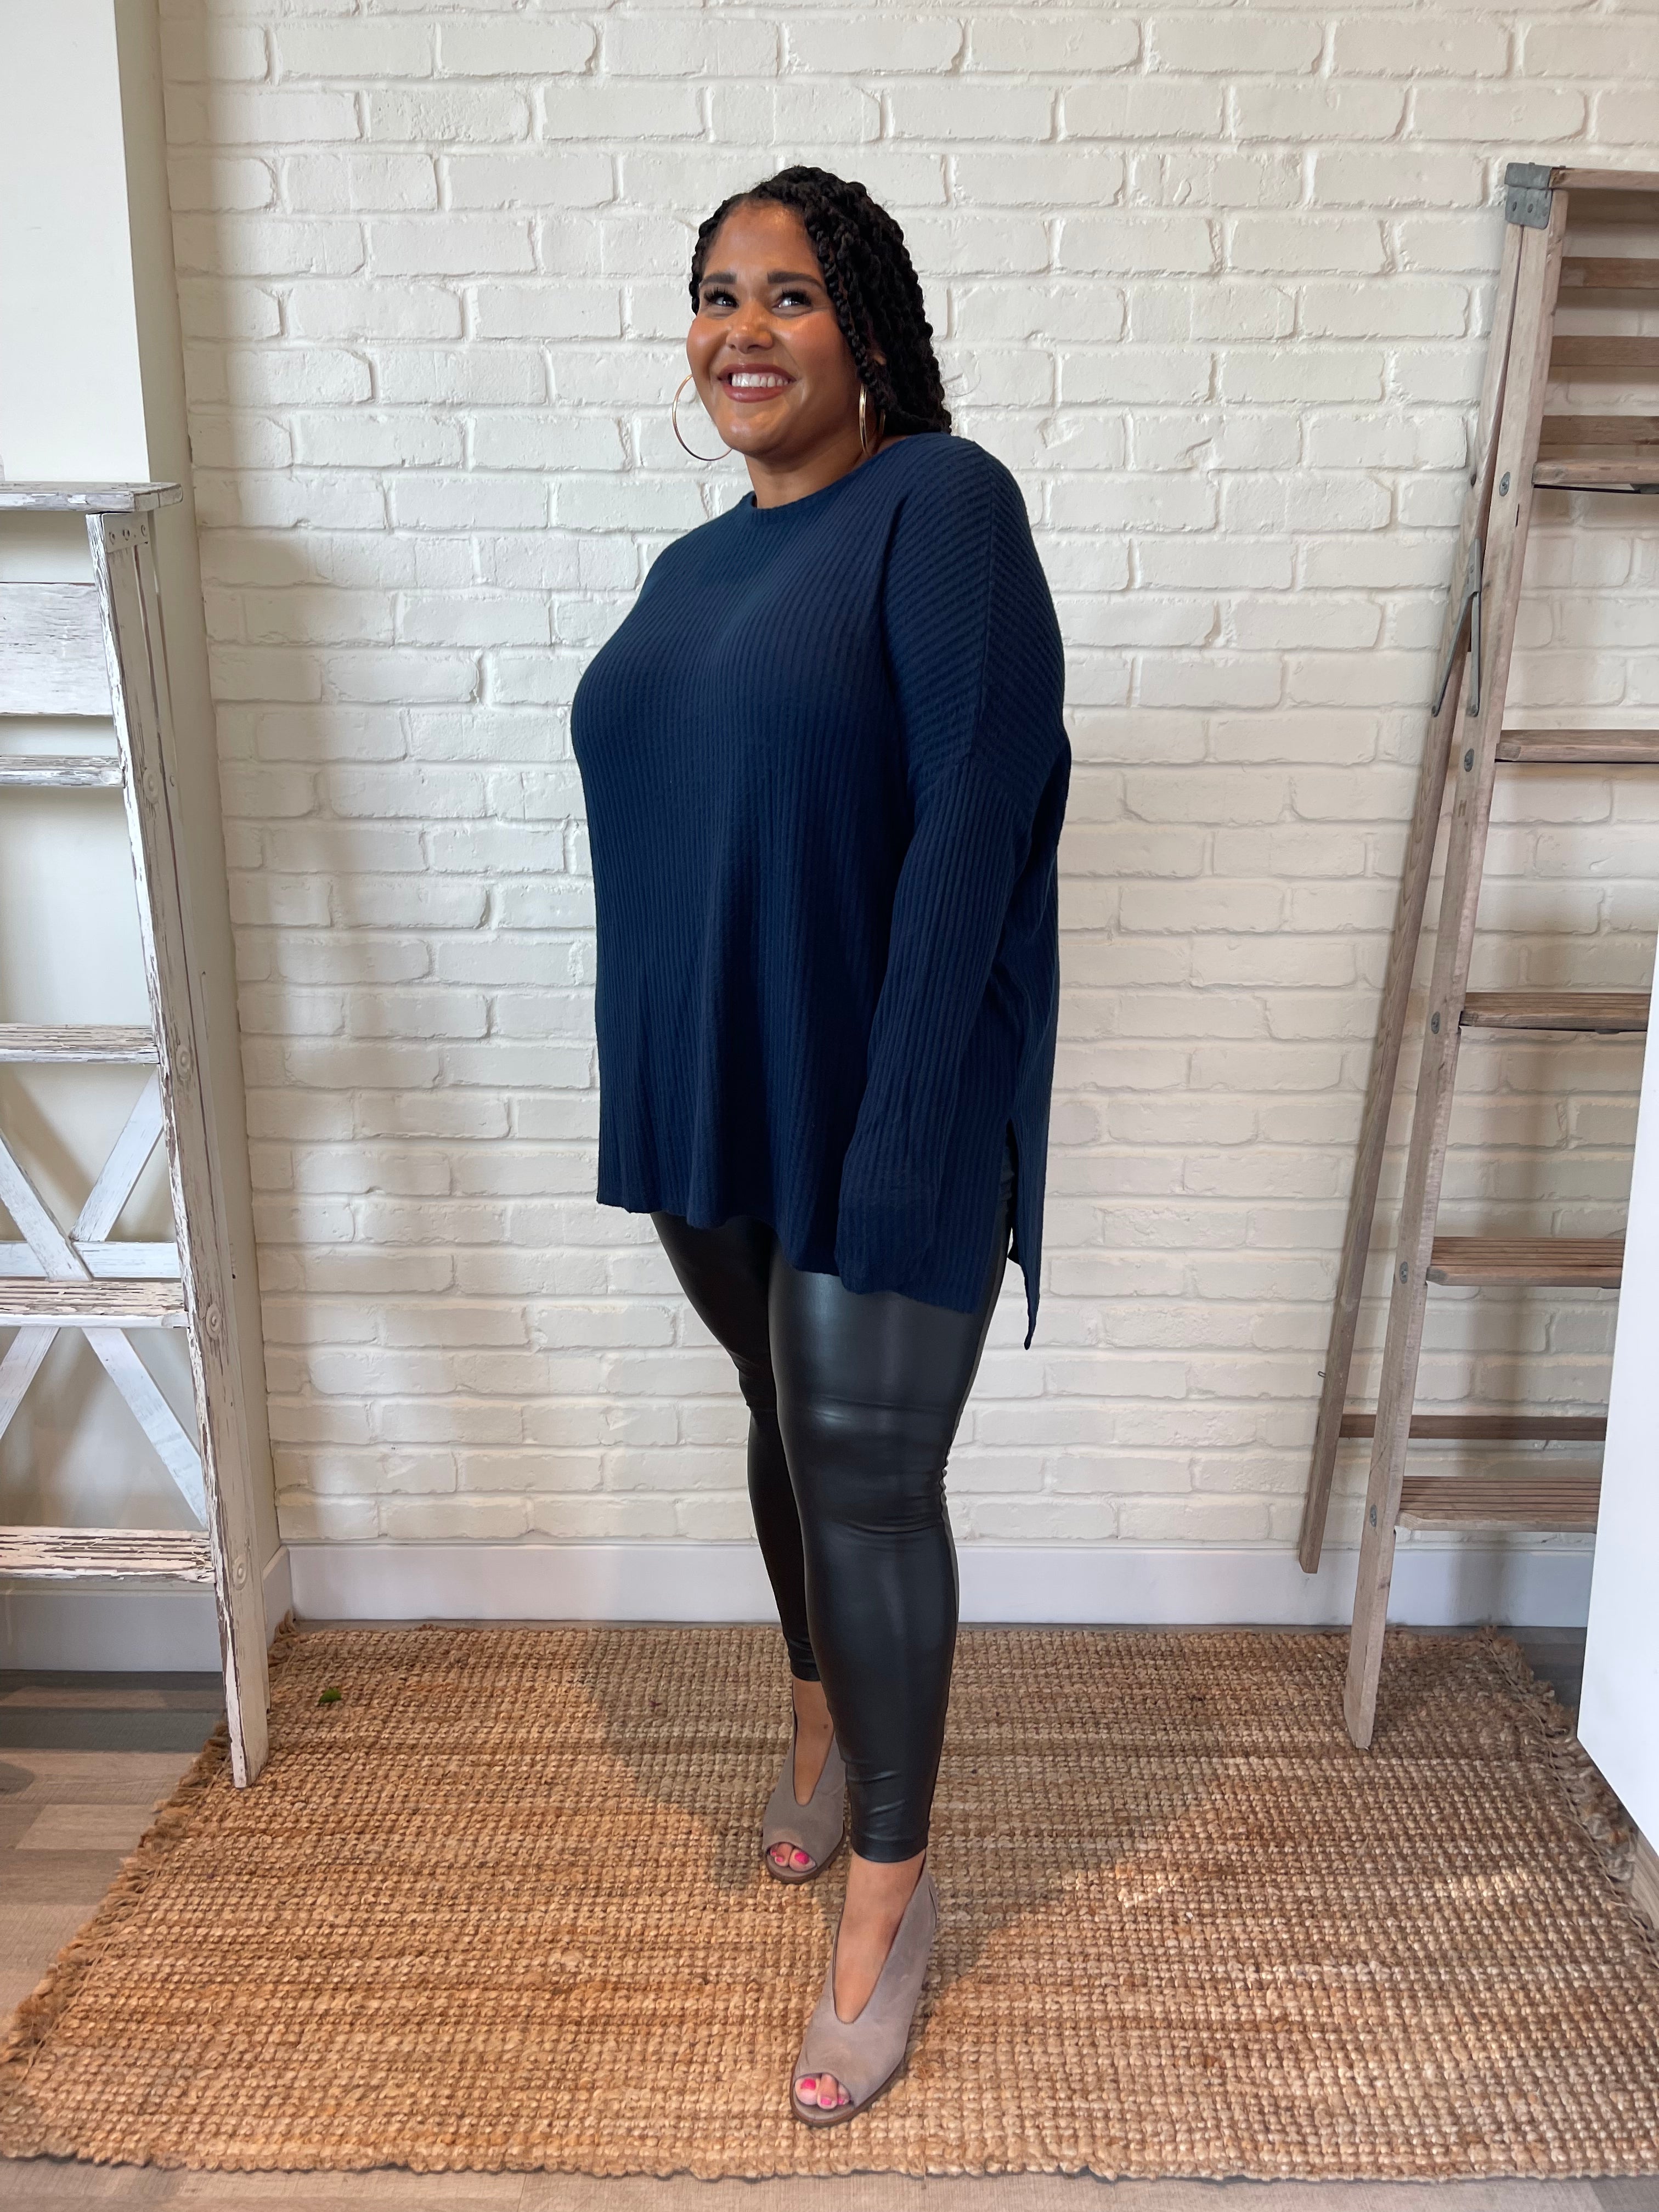 Maggie Over Sized Sweater-Navy Blue